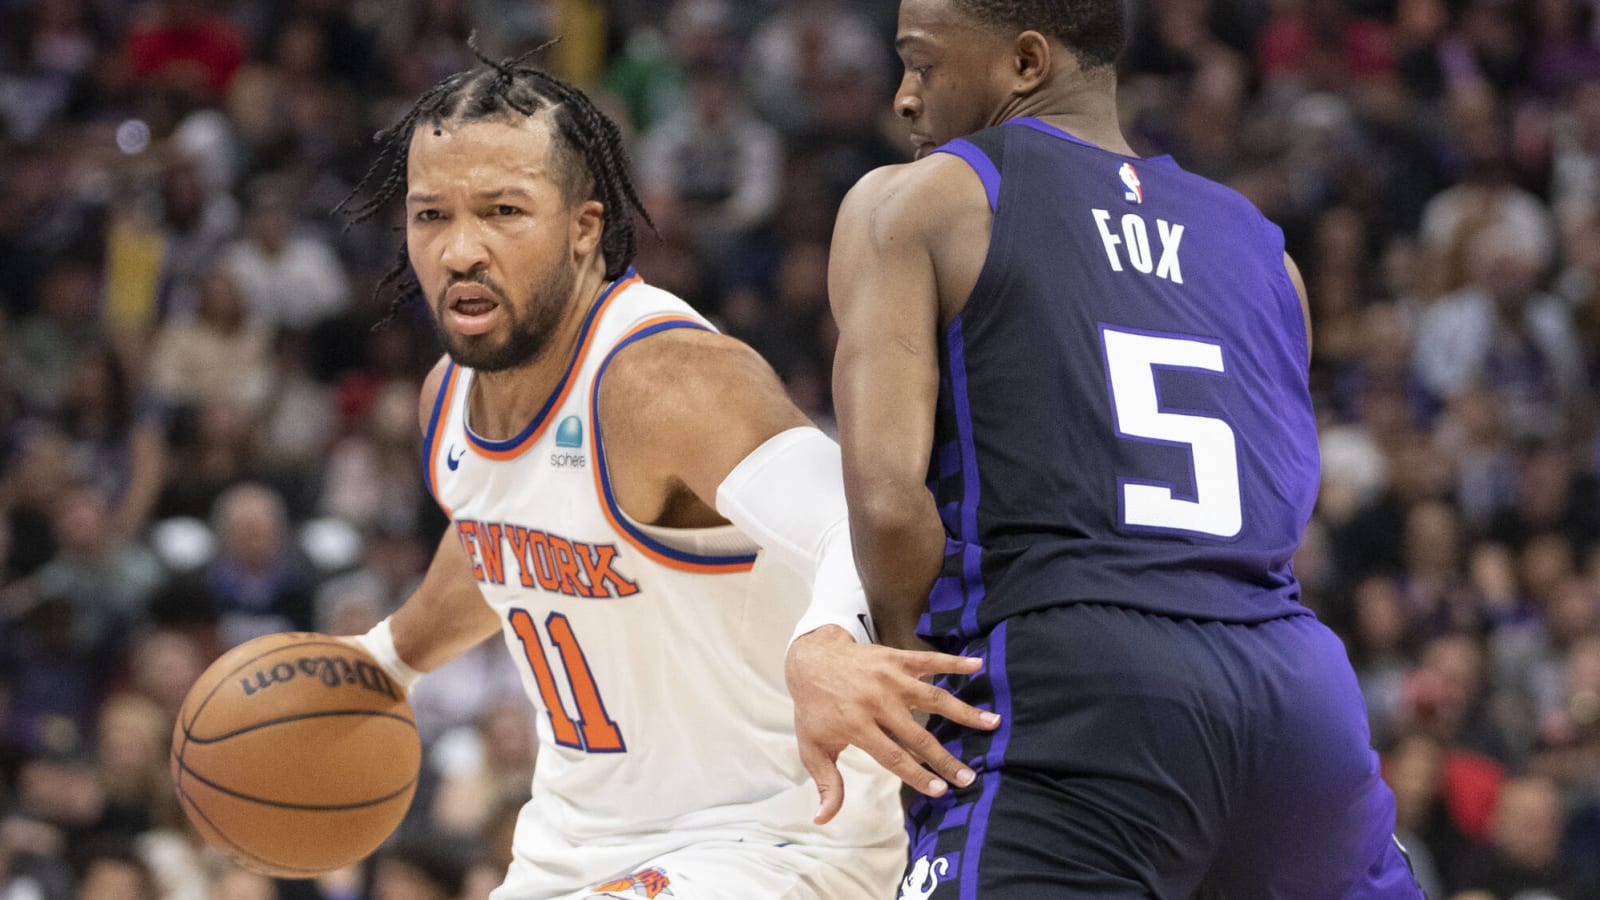 Jalen Brunson completely bamboozled Kings defender with deceptive move